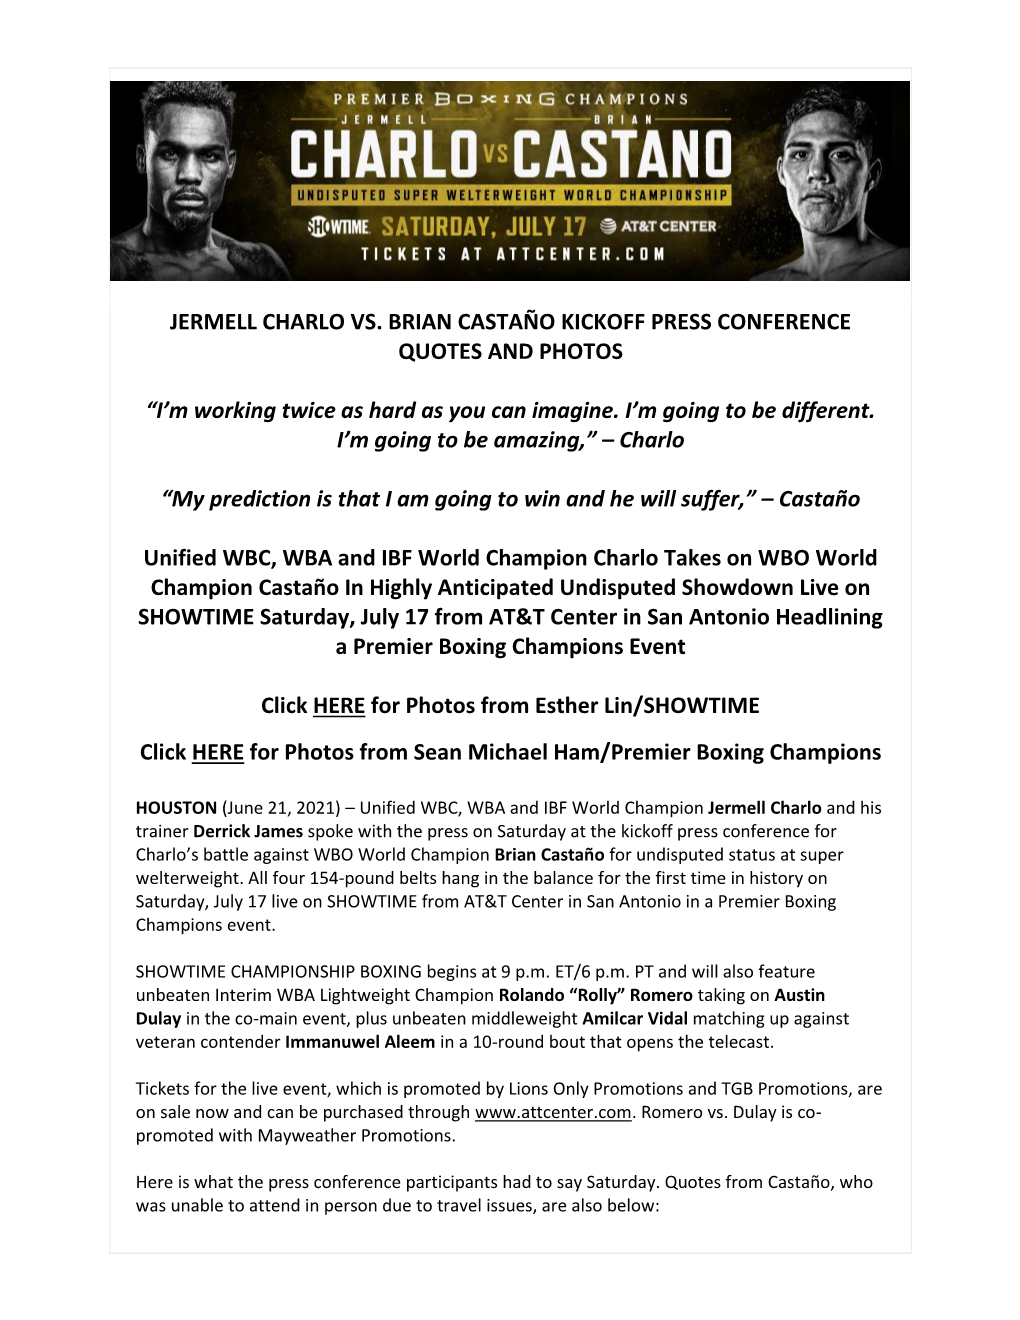 Jermell Charlo Vs. Brian Castaño Kickoff Press Conference Quotes and Photos